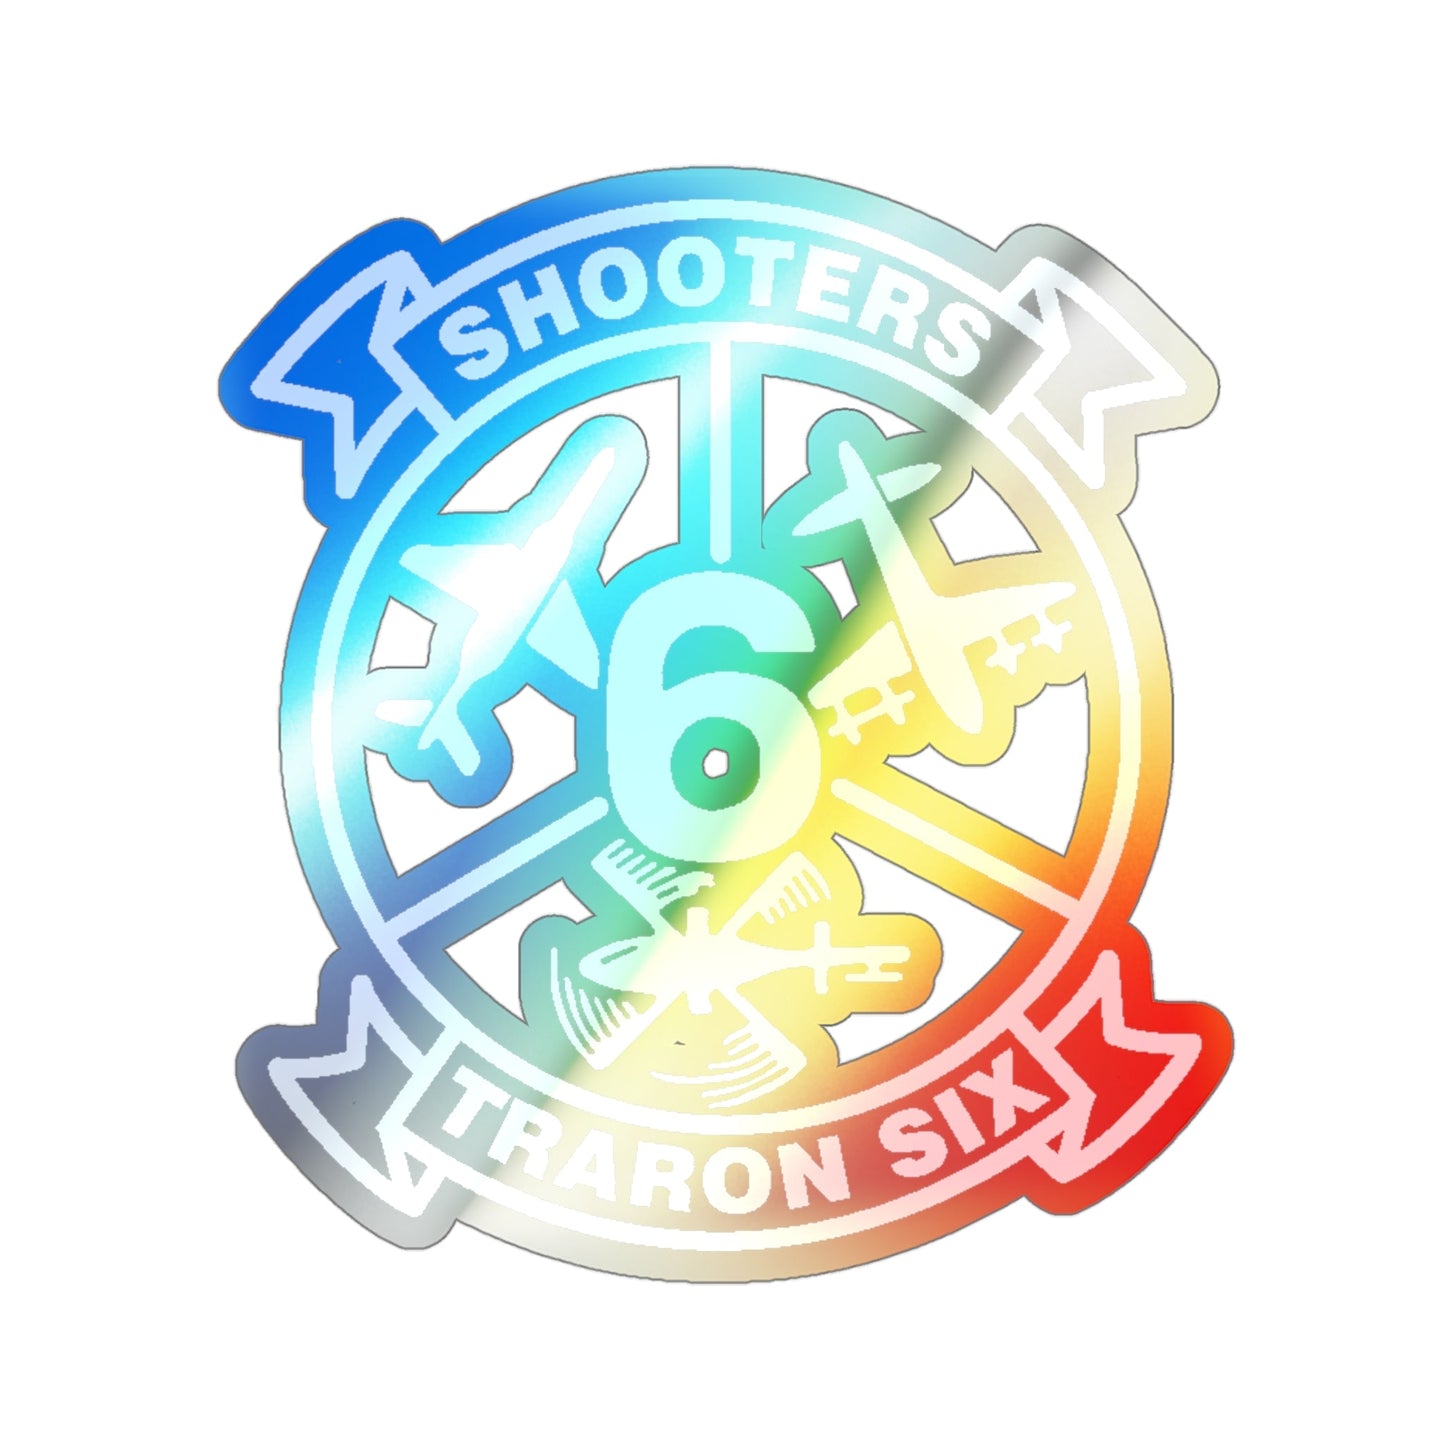 VT 6 TRARON VT6 Shooters (U.S. Navy) Holographic STICKER Die-Cut Vinyl Decal-4 Inch-The Sticker Space